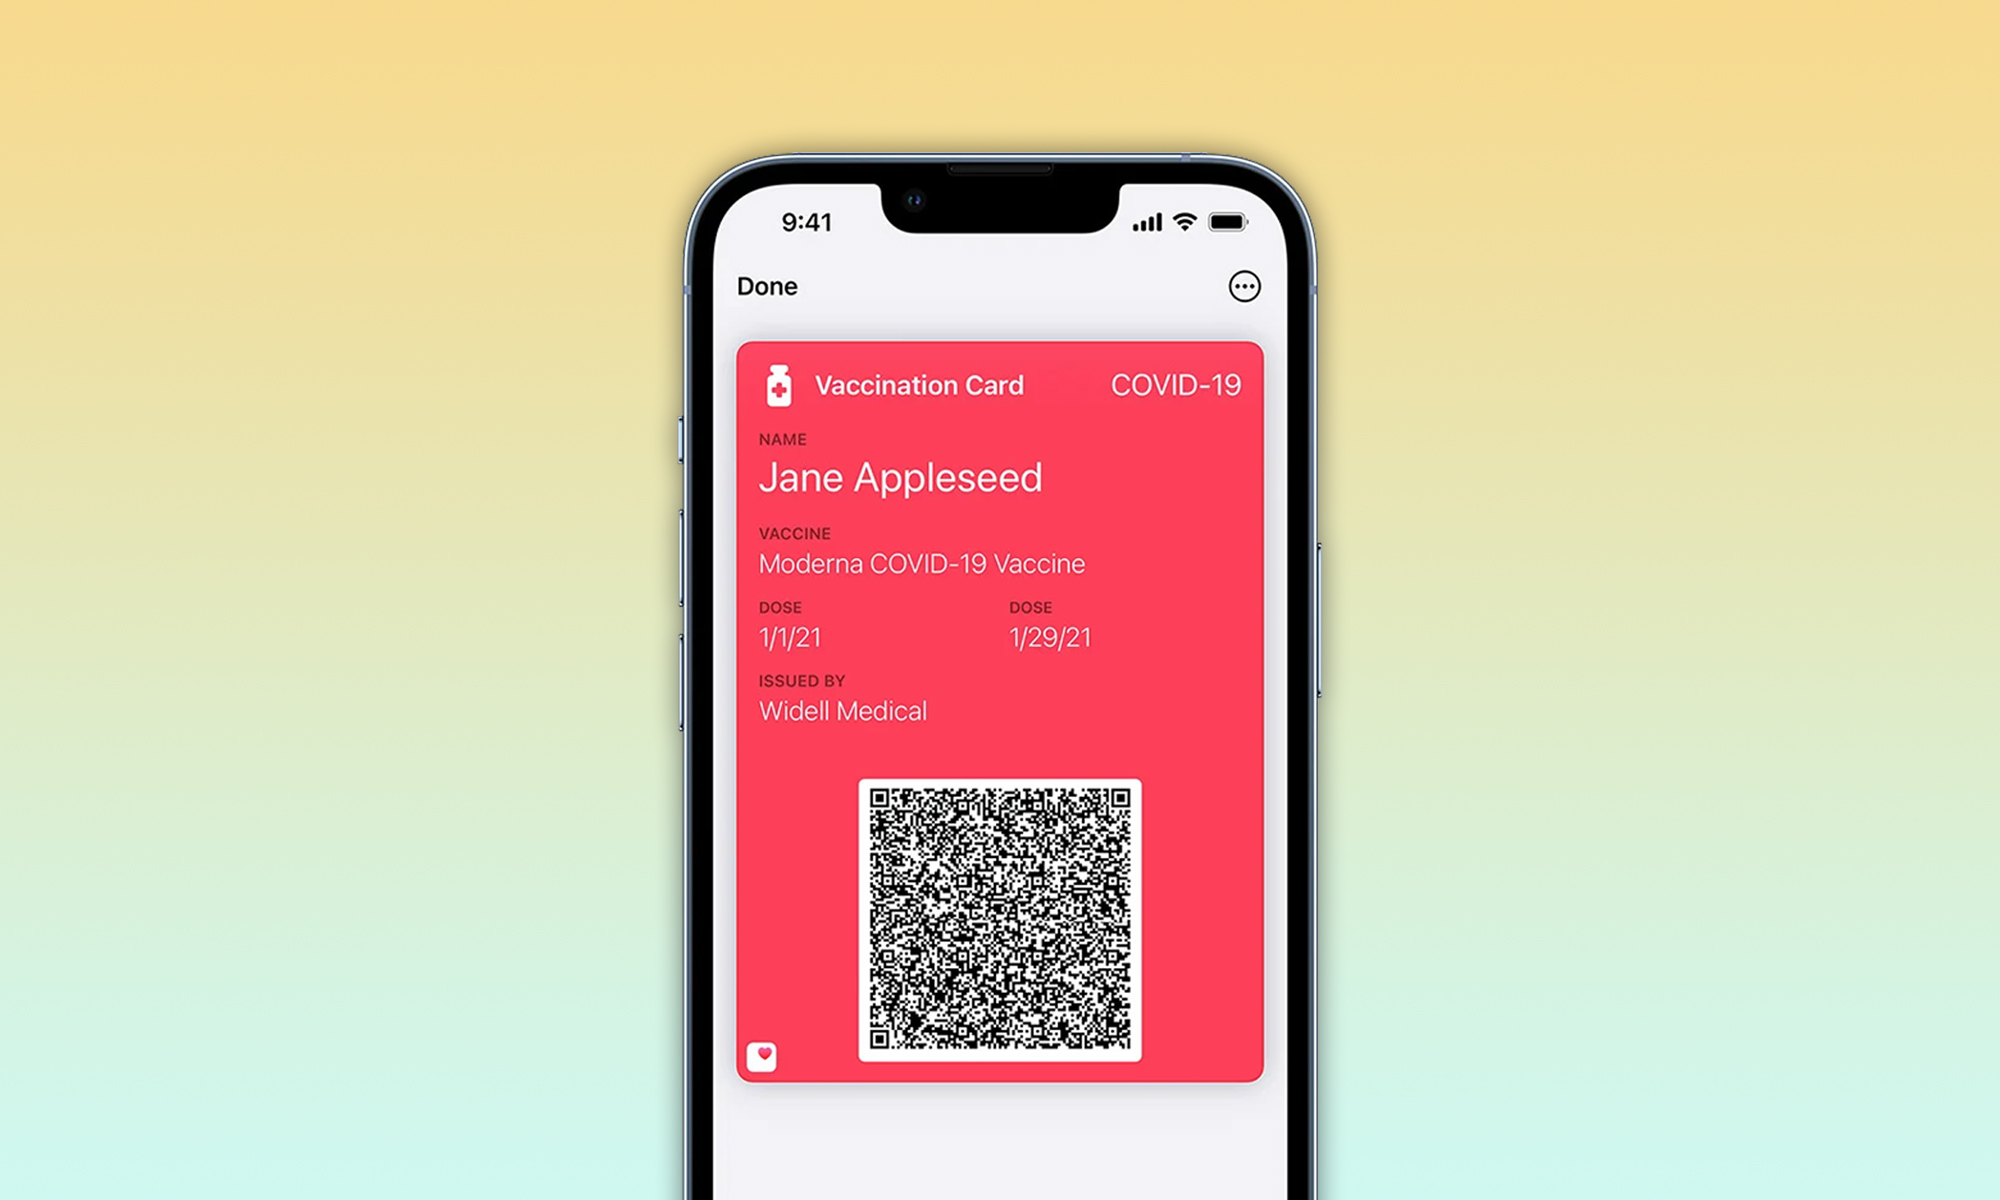 apple wallet will be able to store covid-19 vaccination cards